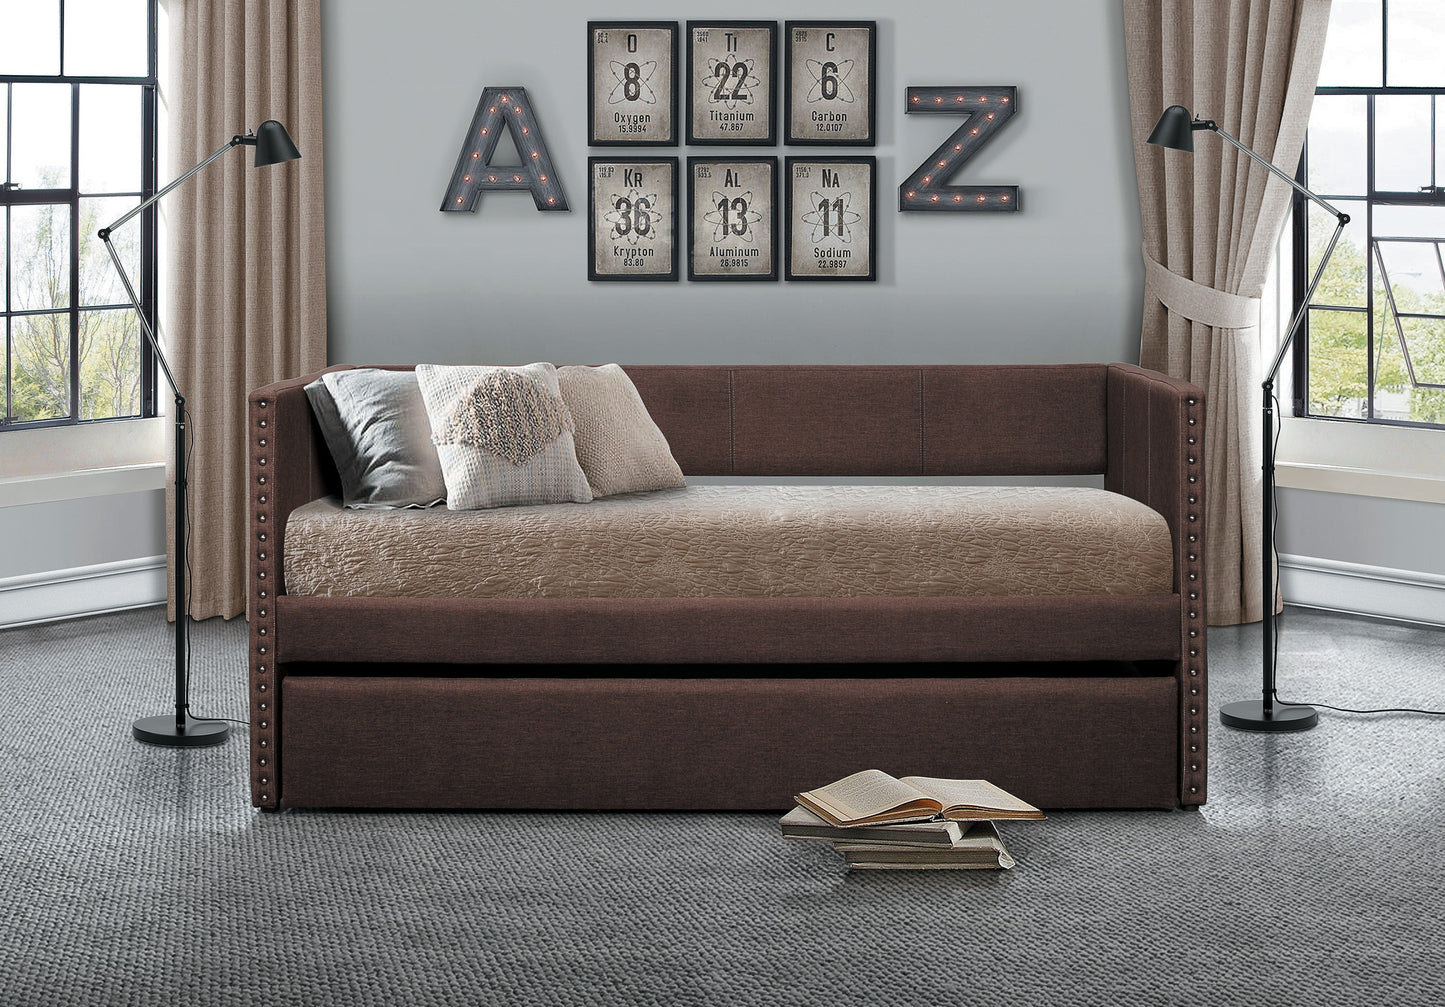 Therese Chocolate Daybed with Trundle